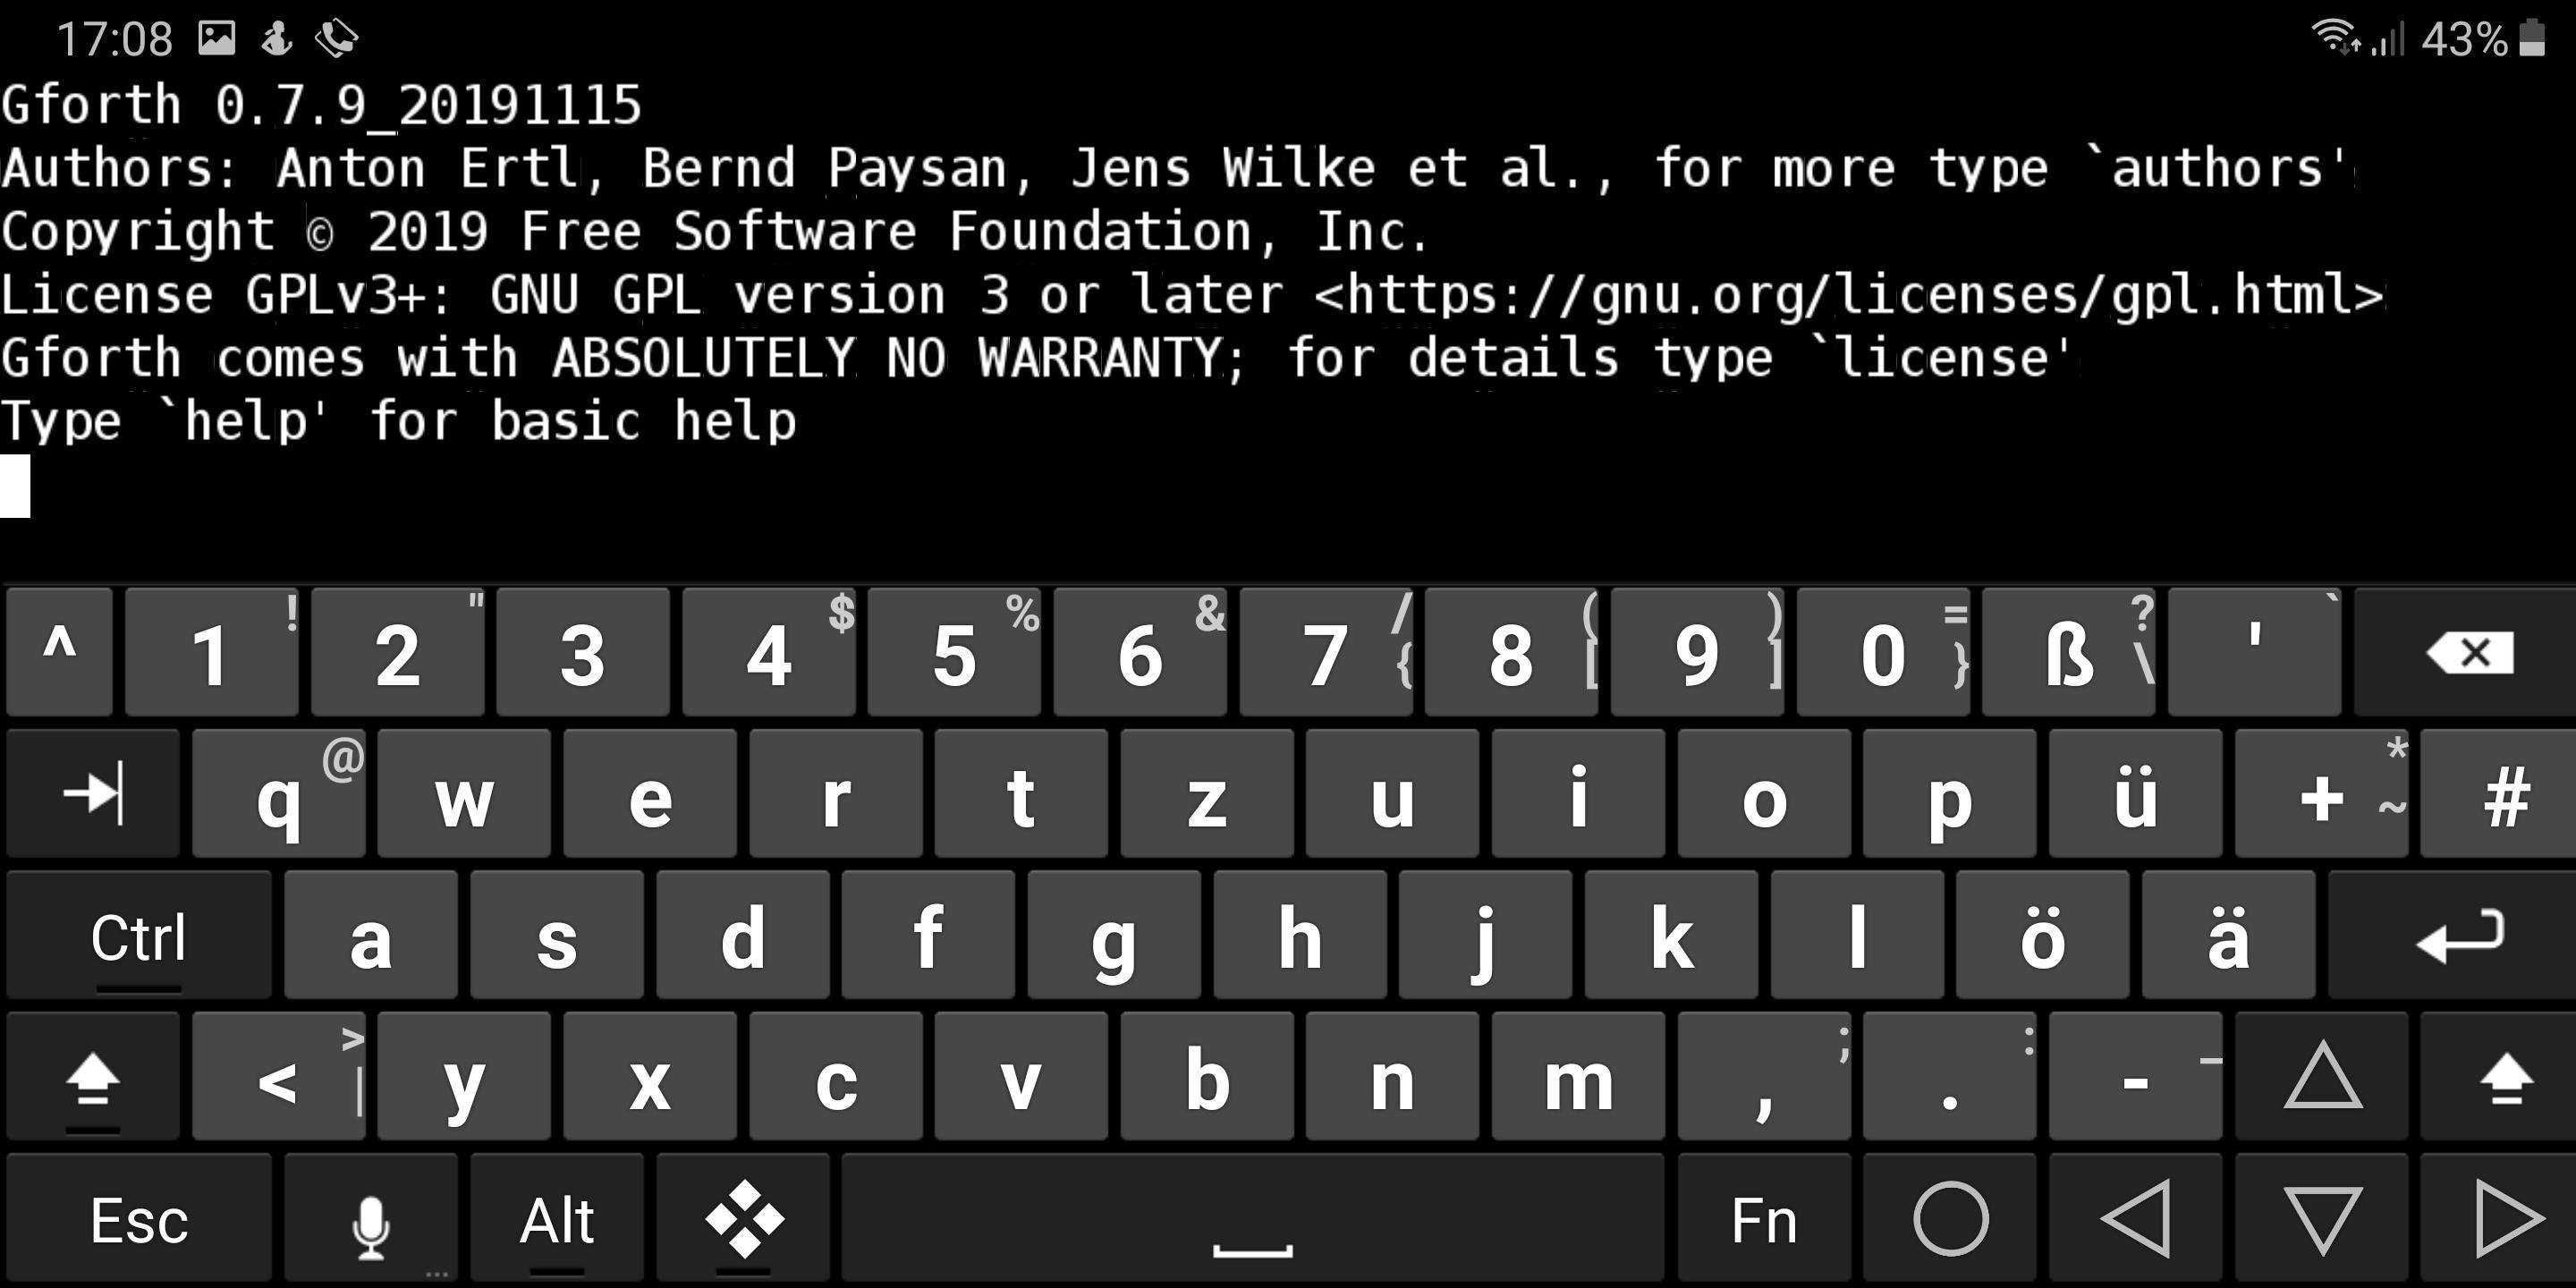 gforth - GNU Forth for Android 0.7.9_20210520 Screenshot 2